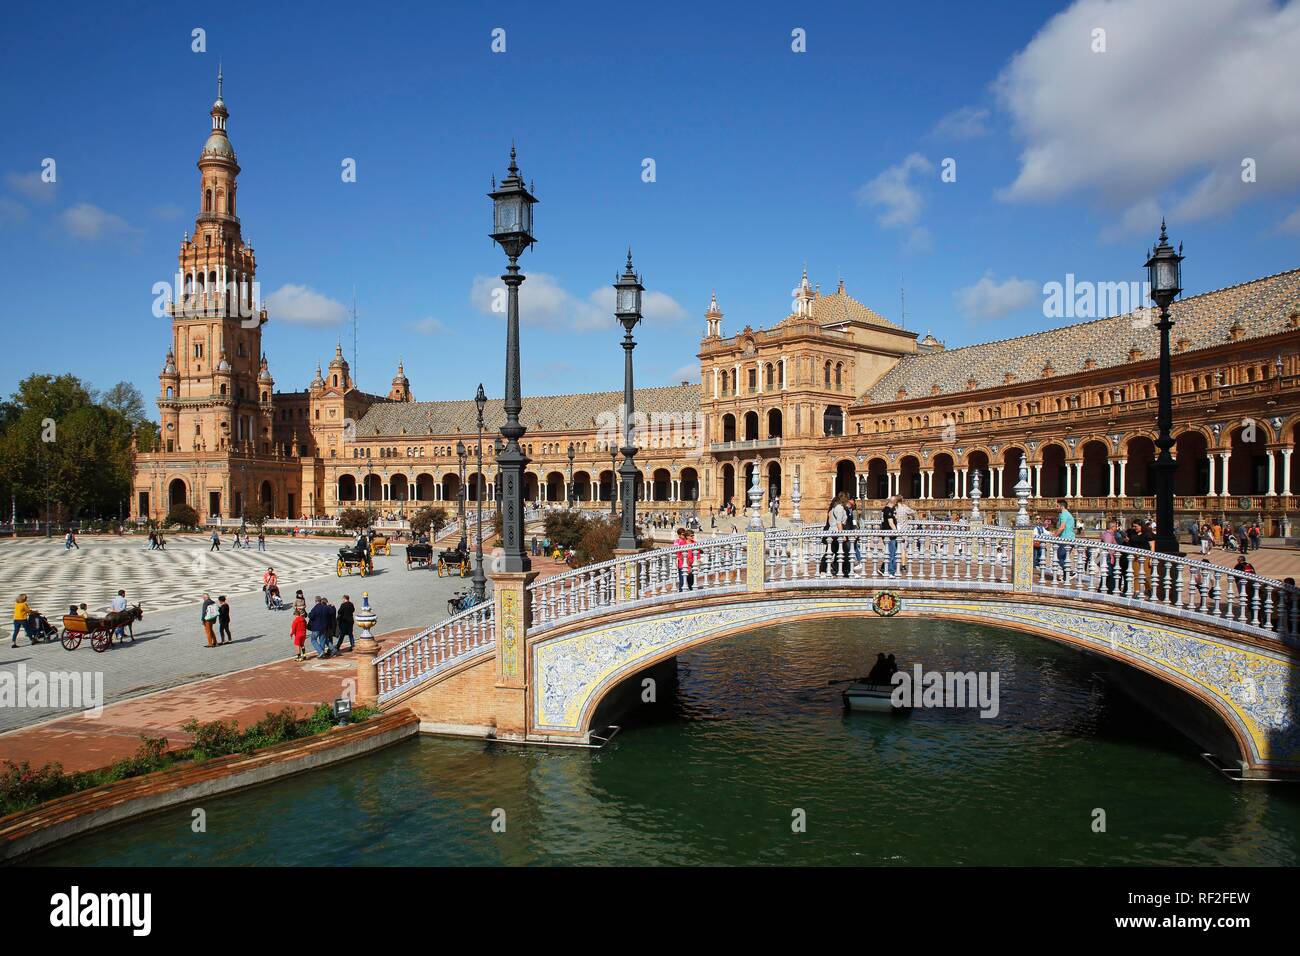 Magnificent buildings on the Plaza de España, Seville, Andalusia, Spain Stock Photo